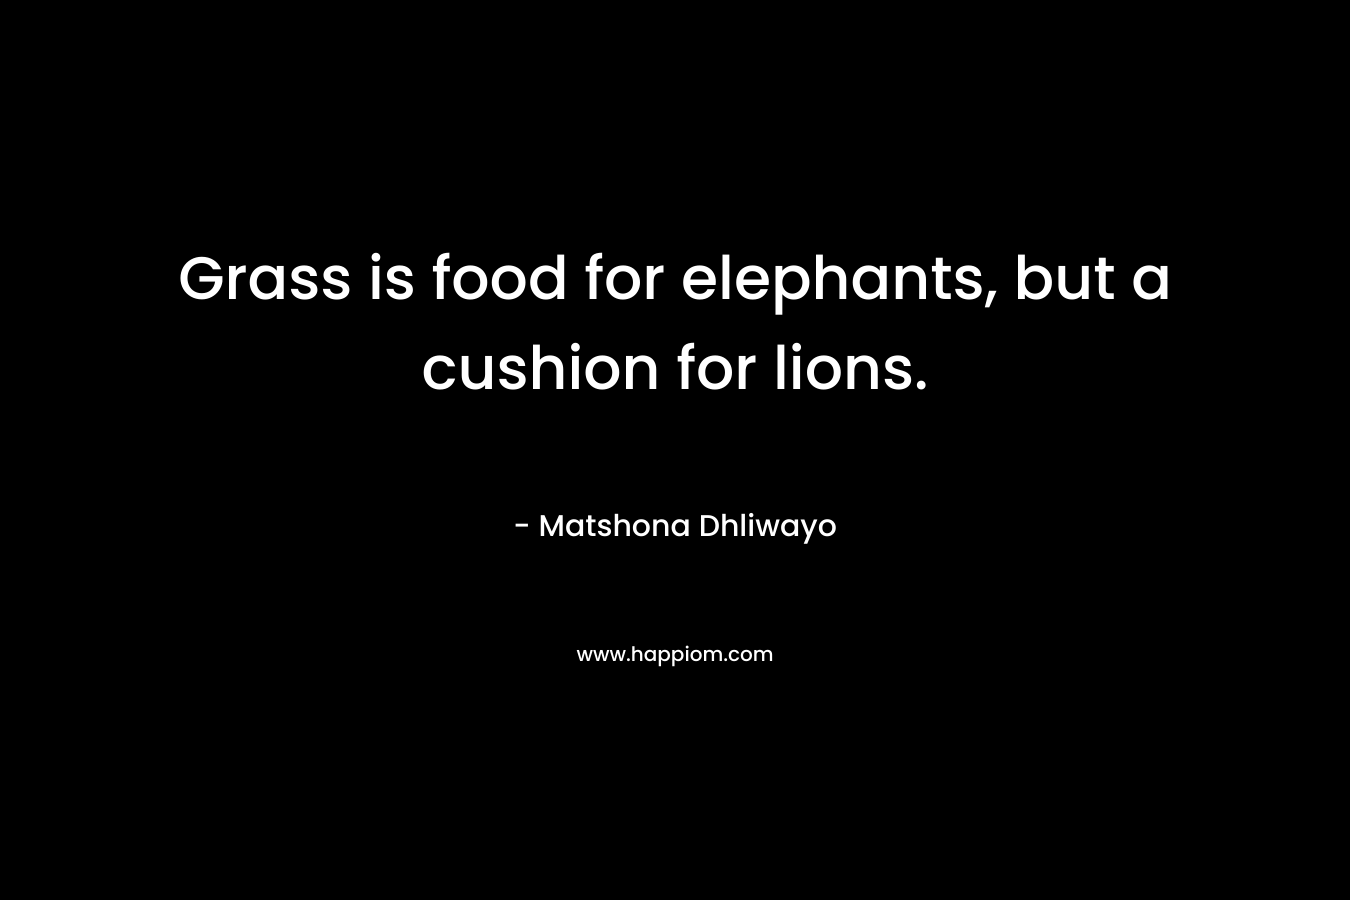 Grass is food for elephants, but a cushion for lions.